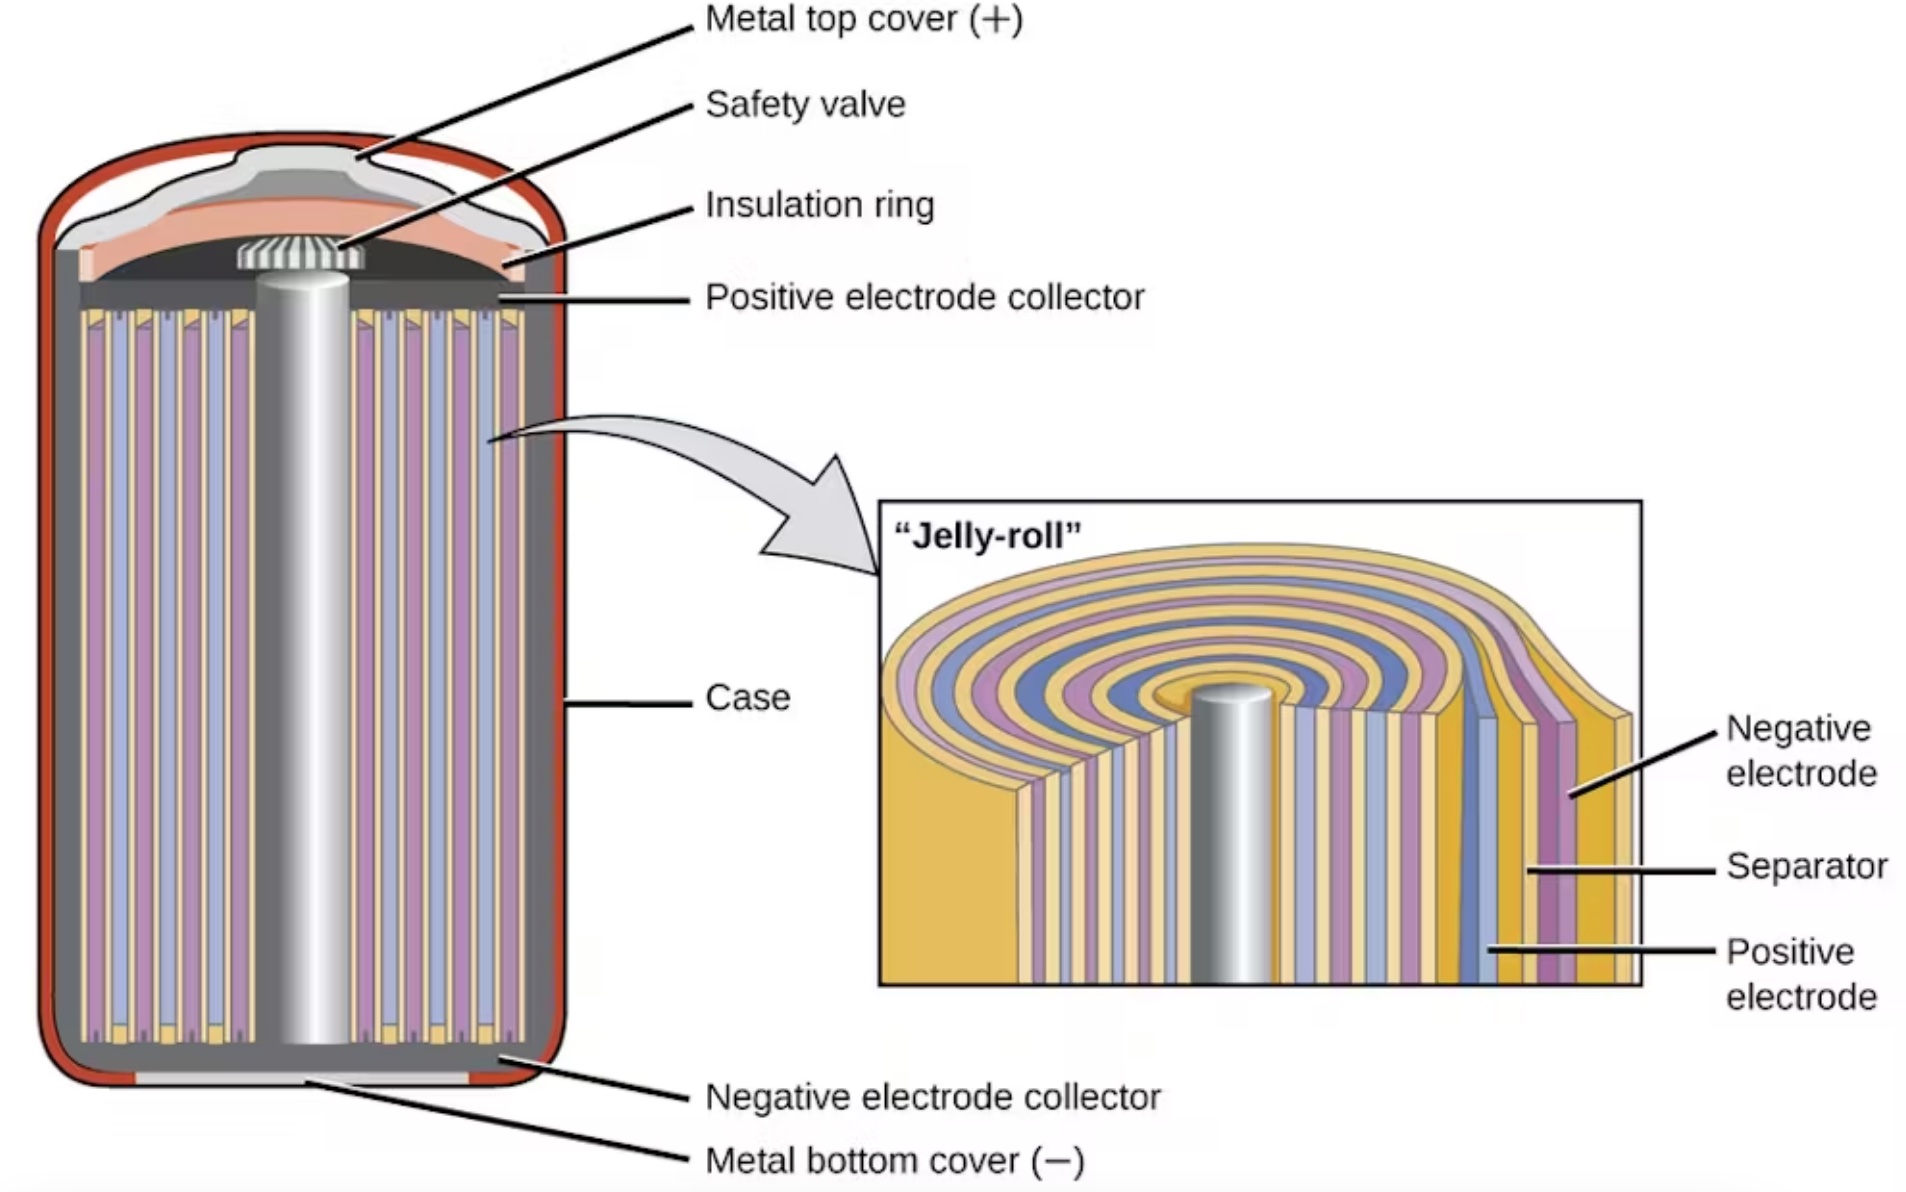 Diagram of a lithium-ion battery cross-section, showing components like the jelly-roll electrodes, insulation, and safety valves, labeled clearly.